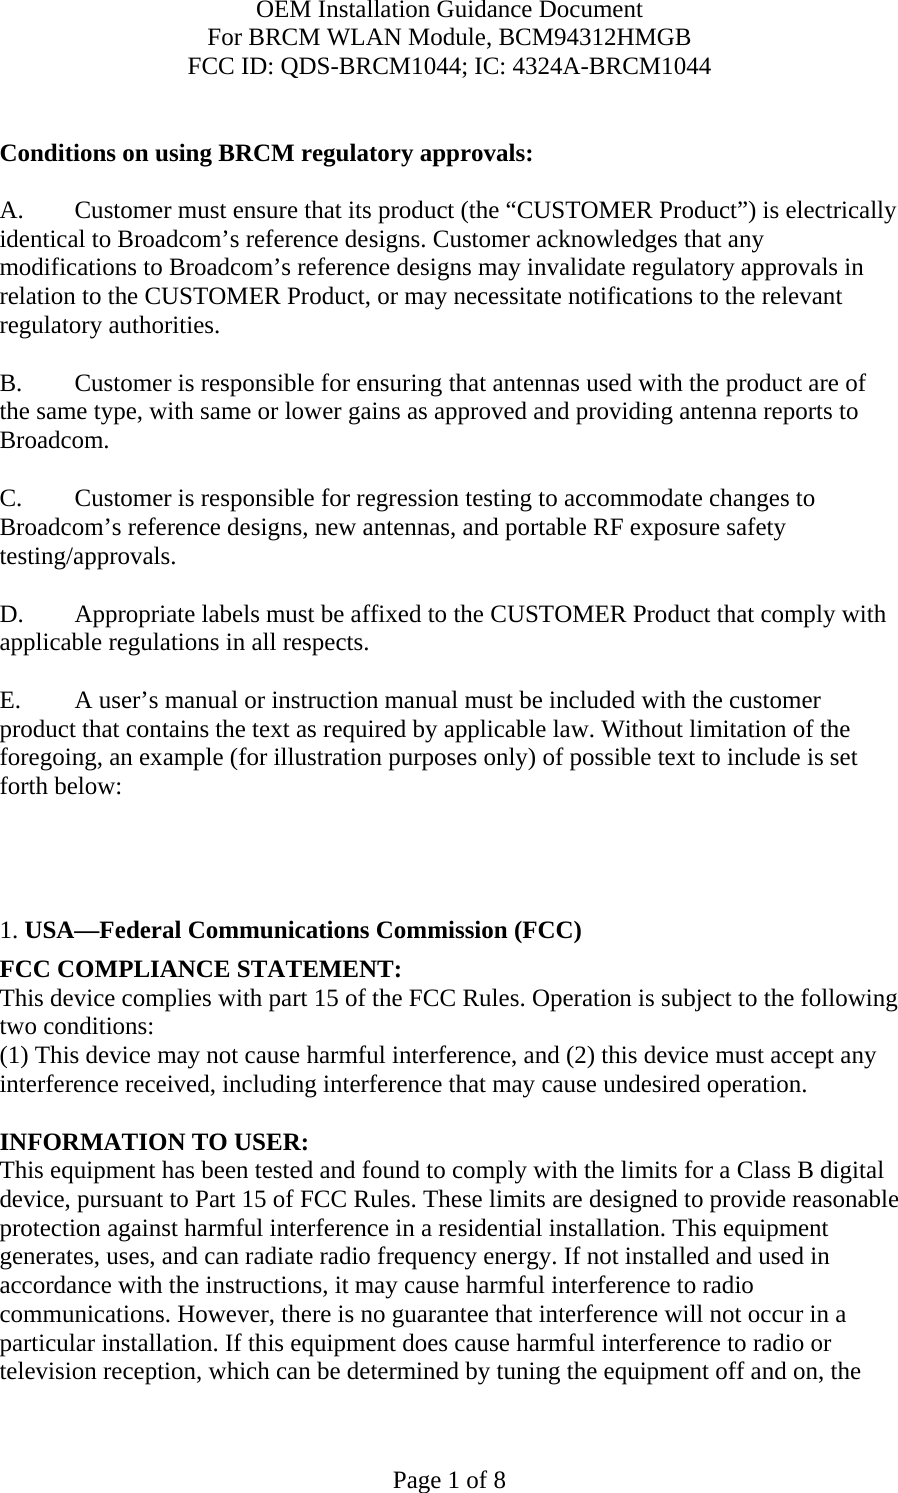 OEM Installation Guidance Document For BRCM WLAN Module, BCM94312HMGB FCC ID: QDS-BRCM1044; IC: 4324A-BRCM1044  Page 1 of 8  Conditions on using BRCM regulatory approvals:   A.  Customer must ensure that its product (the “CUSTOMER Product”) is electrically identical to Broadcom’s reference designs. Customer acknowledges that any modifications to Broadcom’s reference designs may invalidate regulatory approvals in relation to the CUSTOMER Product, or may necessitate notifications to the relevant regulatory authorities.  B.   Customer is responsible for ensuring that antennas used with the product are of the same type, with same or lower gains as approved and providing antenna reports to Broadcom.  C.   Customer is responsible for regression testing to accommodate changes to Broadcom’s reference designs, new antennas, and portable RF exposure safety testing/approvals.  D.  Appropriate labels must be affixed to the CUSTOMER Product that comply with applicable regulations in all respects.    E.  A user’s manual or instruction manual must be included with the customer product that contains the text as required by applicable law. Without limitation of the foregoing, an example (for illustration purposes only) of possible text to include is set forth below:       1. USA—Federal Communications Commission (FCC) FCC COMPLIANCE STATEMENT: This device complies with part 15 of the FCC Rules. Operation is subject to the following two conditions: (1) This device may not cause harmful interference, and (2) this device must accept any interference received, including interference that may cause undesired operation.  INFORMATION TO USER: This equipment has been tested and found to comply with the limits for a Class B digital device, pursuant to Part 15 of FCC Rules. These limits are designed to provide reasonable protection against harmful interference in a residential installation. This equipment generates, uses, and can radiate radio frequency energy. If not installed and used in accordance with the instructions, it may cause harmful interference to radio communications. However, there is no guarantee that interference will not occur in a particular installation. If this equipment does cause harmful interference to radio or television reception, which can be determined by tuning the equipment off and on, the 